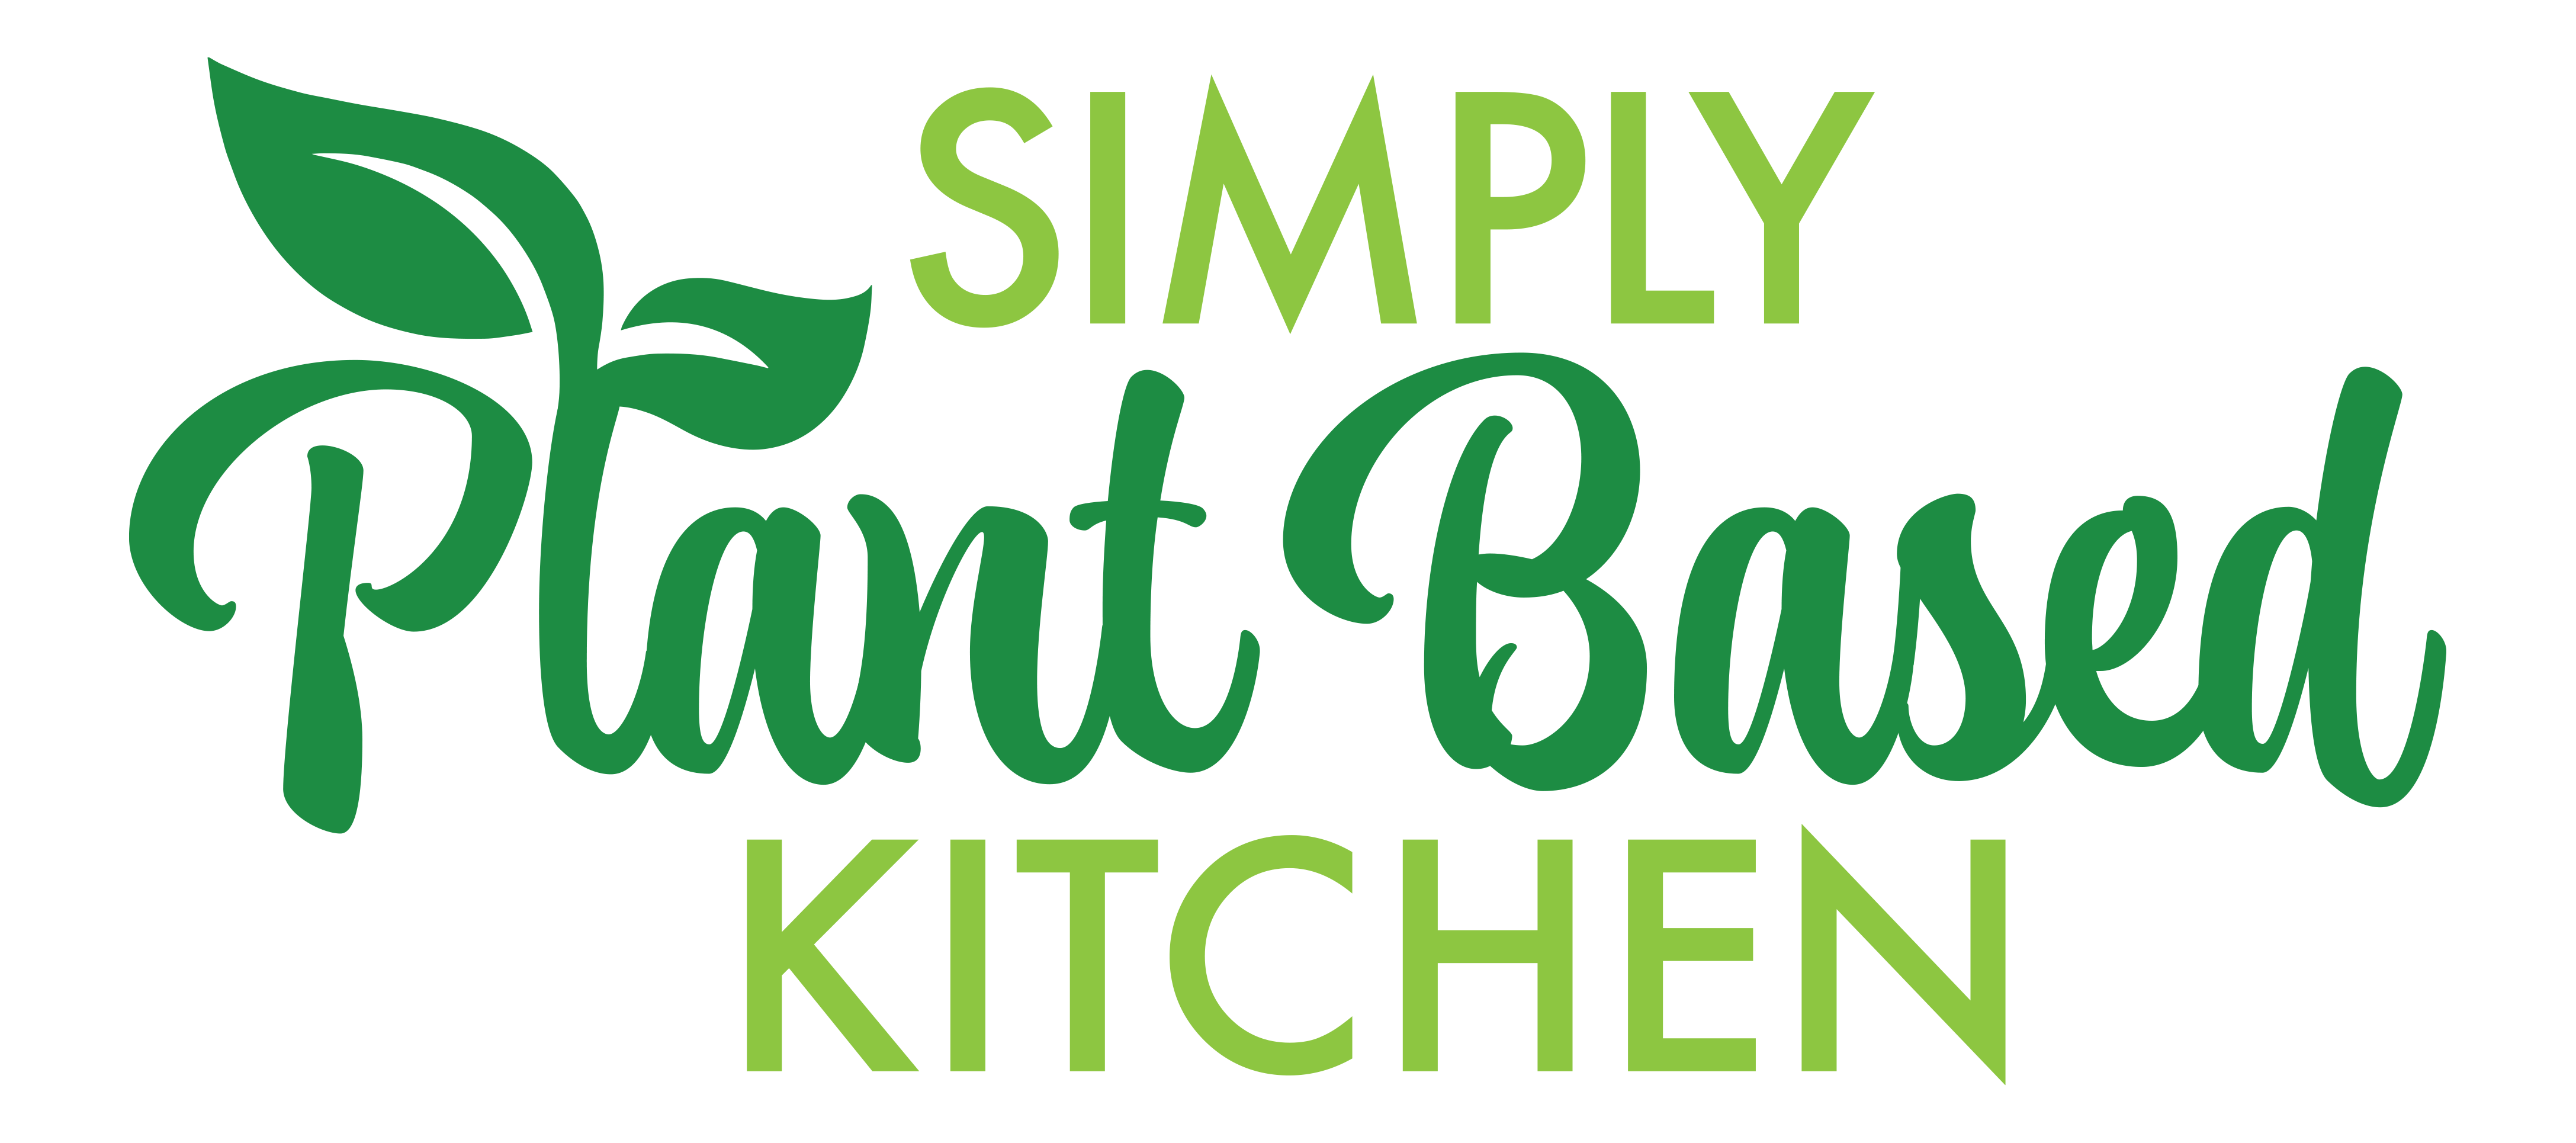 Simply Plant Based Kitchen